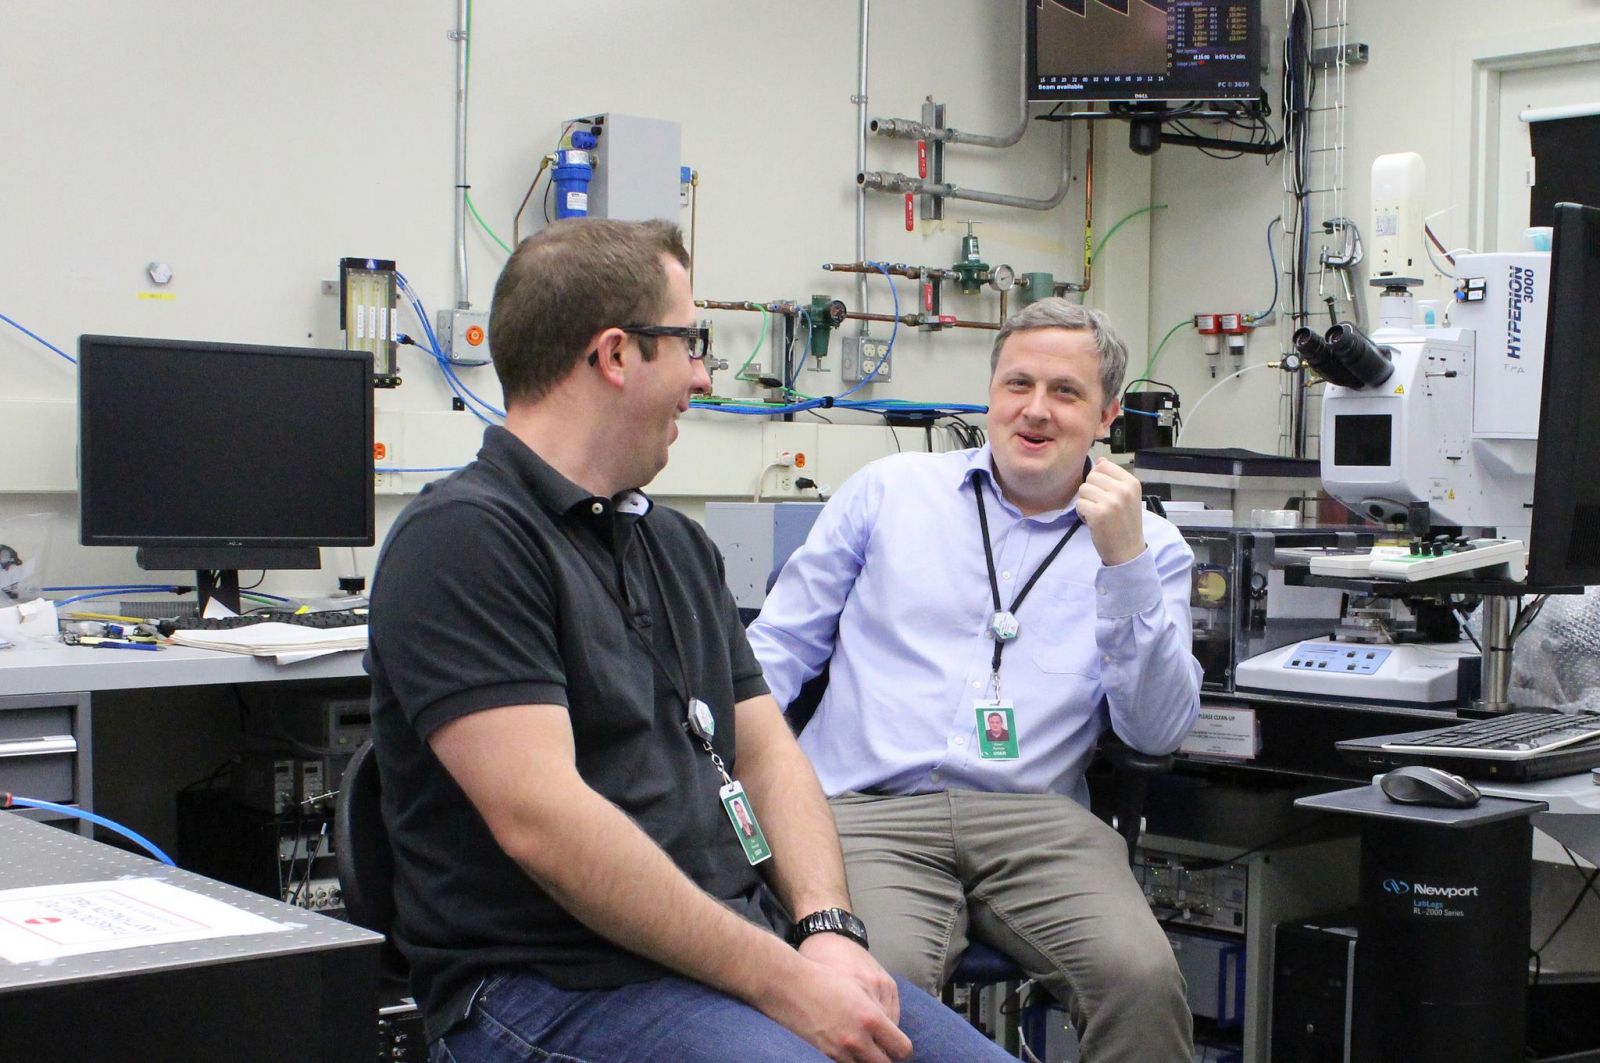 Prof. Owen Addison (right) with co-author Dr. Dan Romanyk, from the University of Alberta, at the MidIR beamline at the CLS, which they used for their experiment.